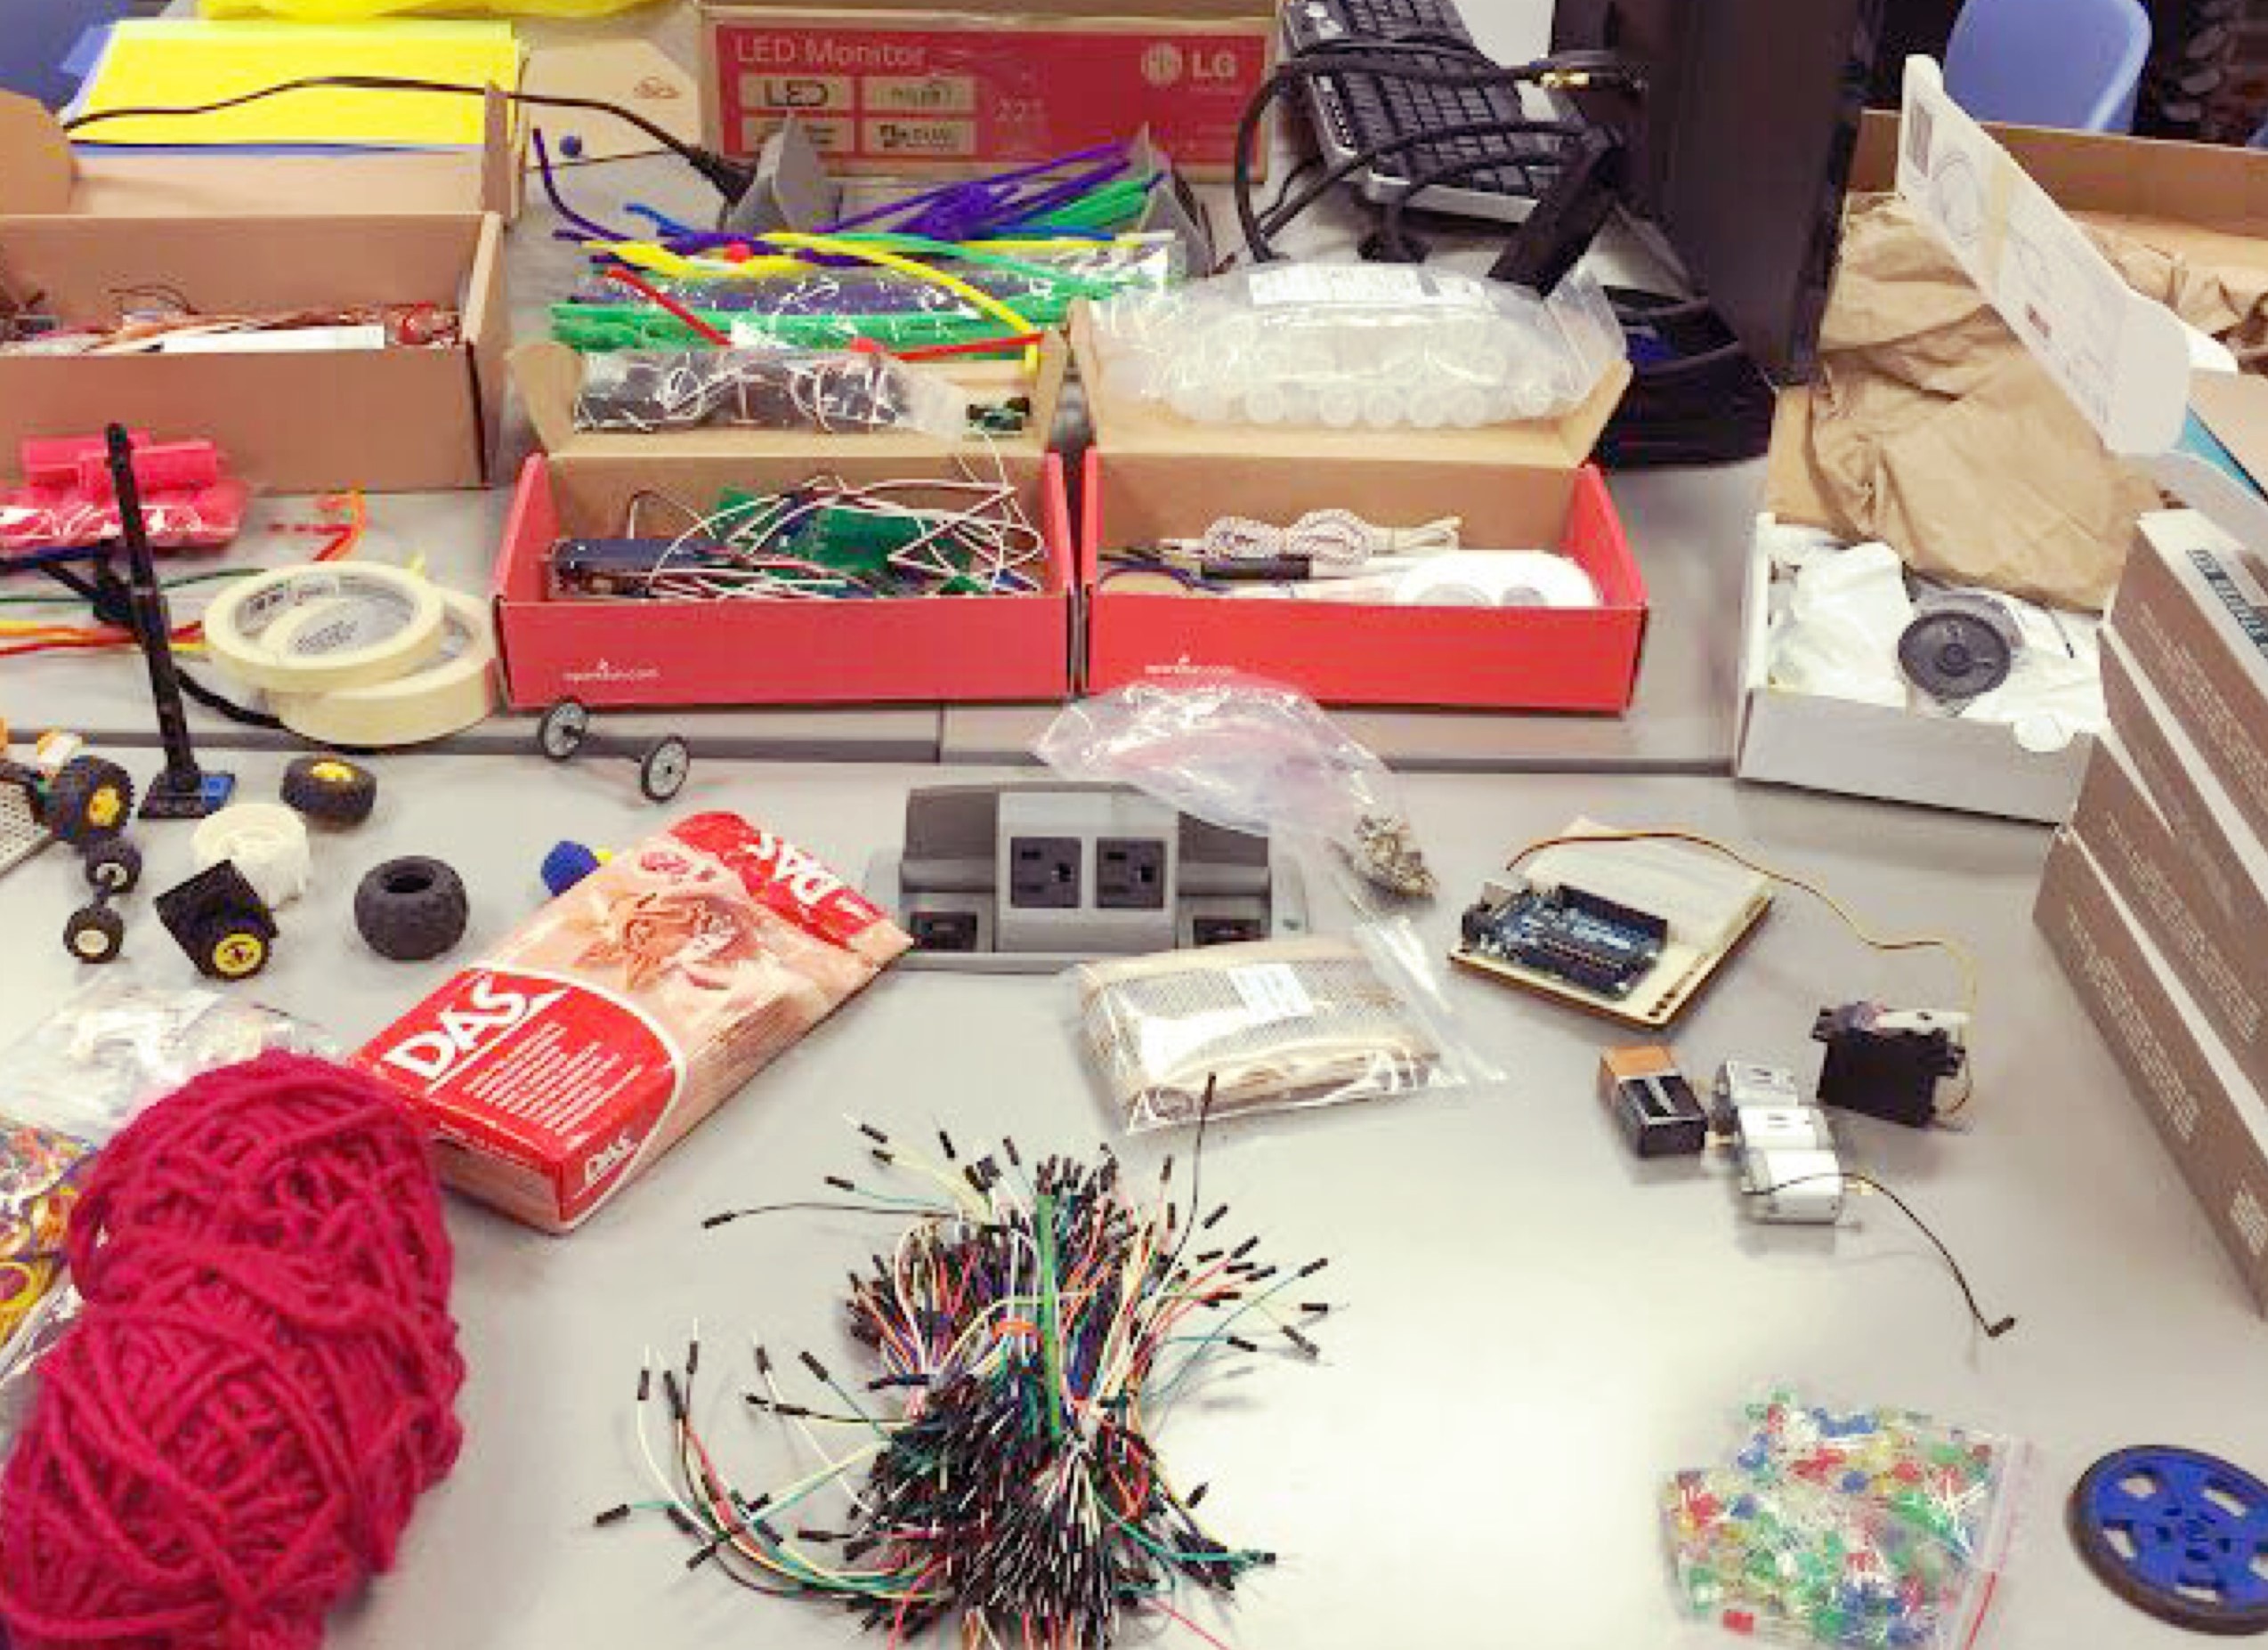 A work table filled with various electronic and arts parts such as wires, in the STEAM lab